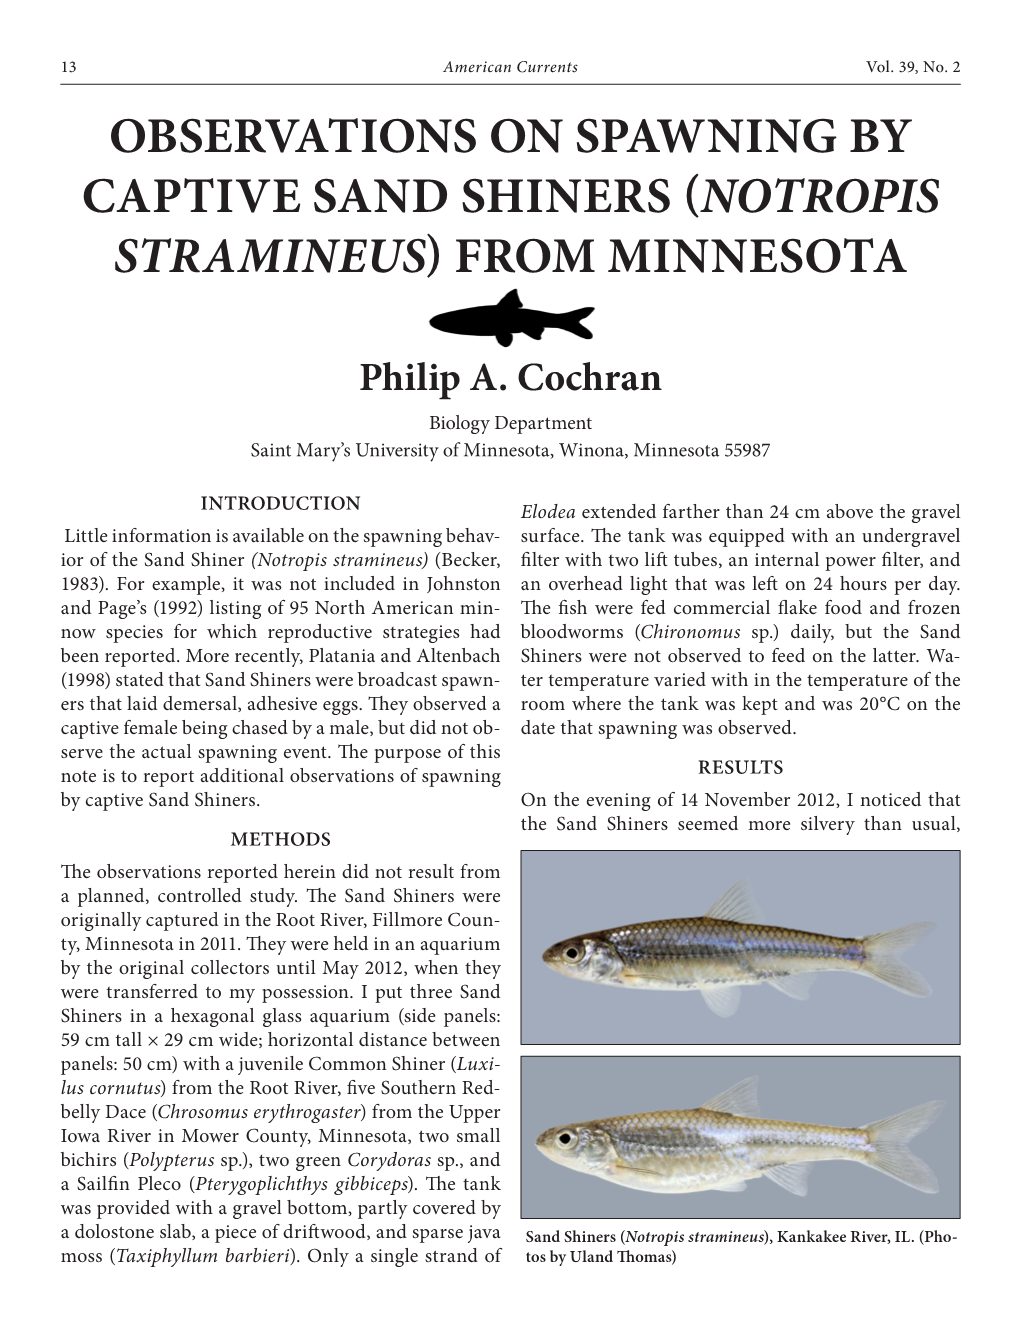 Observations on Spawning by Captive Sand Shiners (Notropis Stramineus) from Minnesota